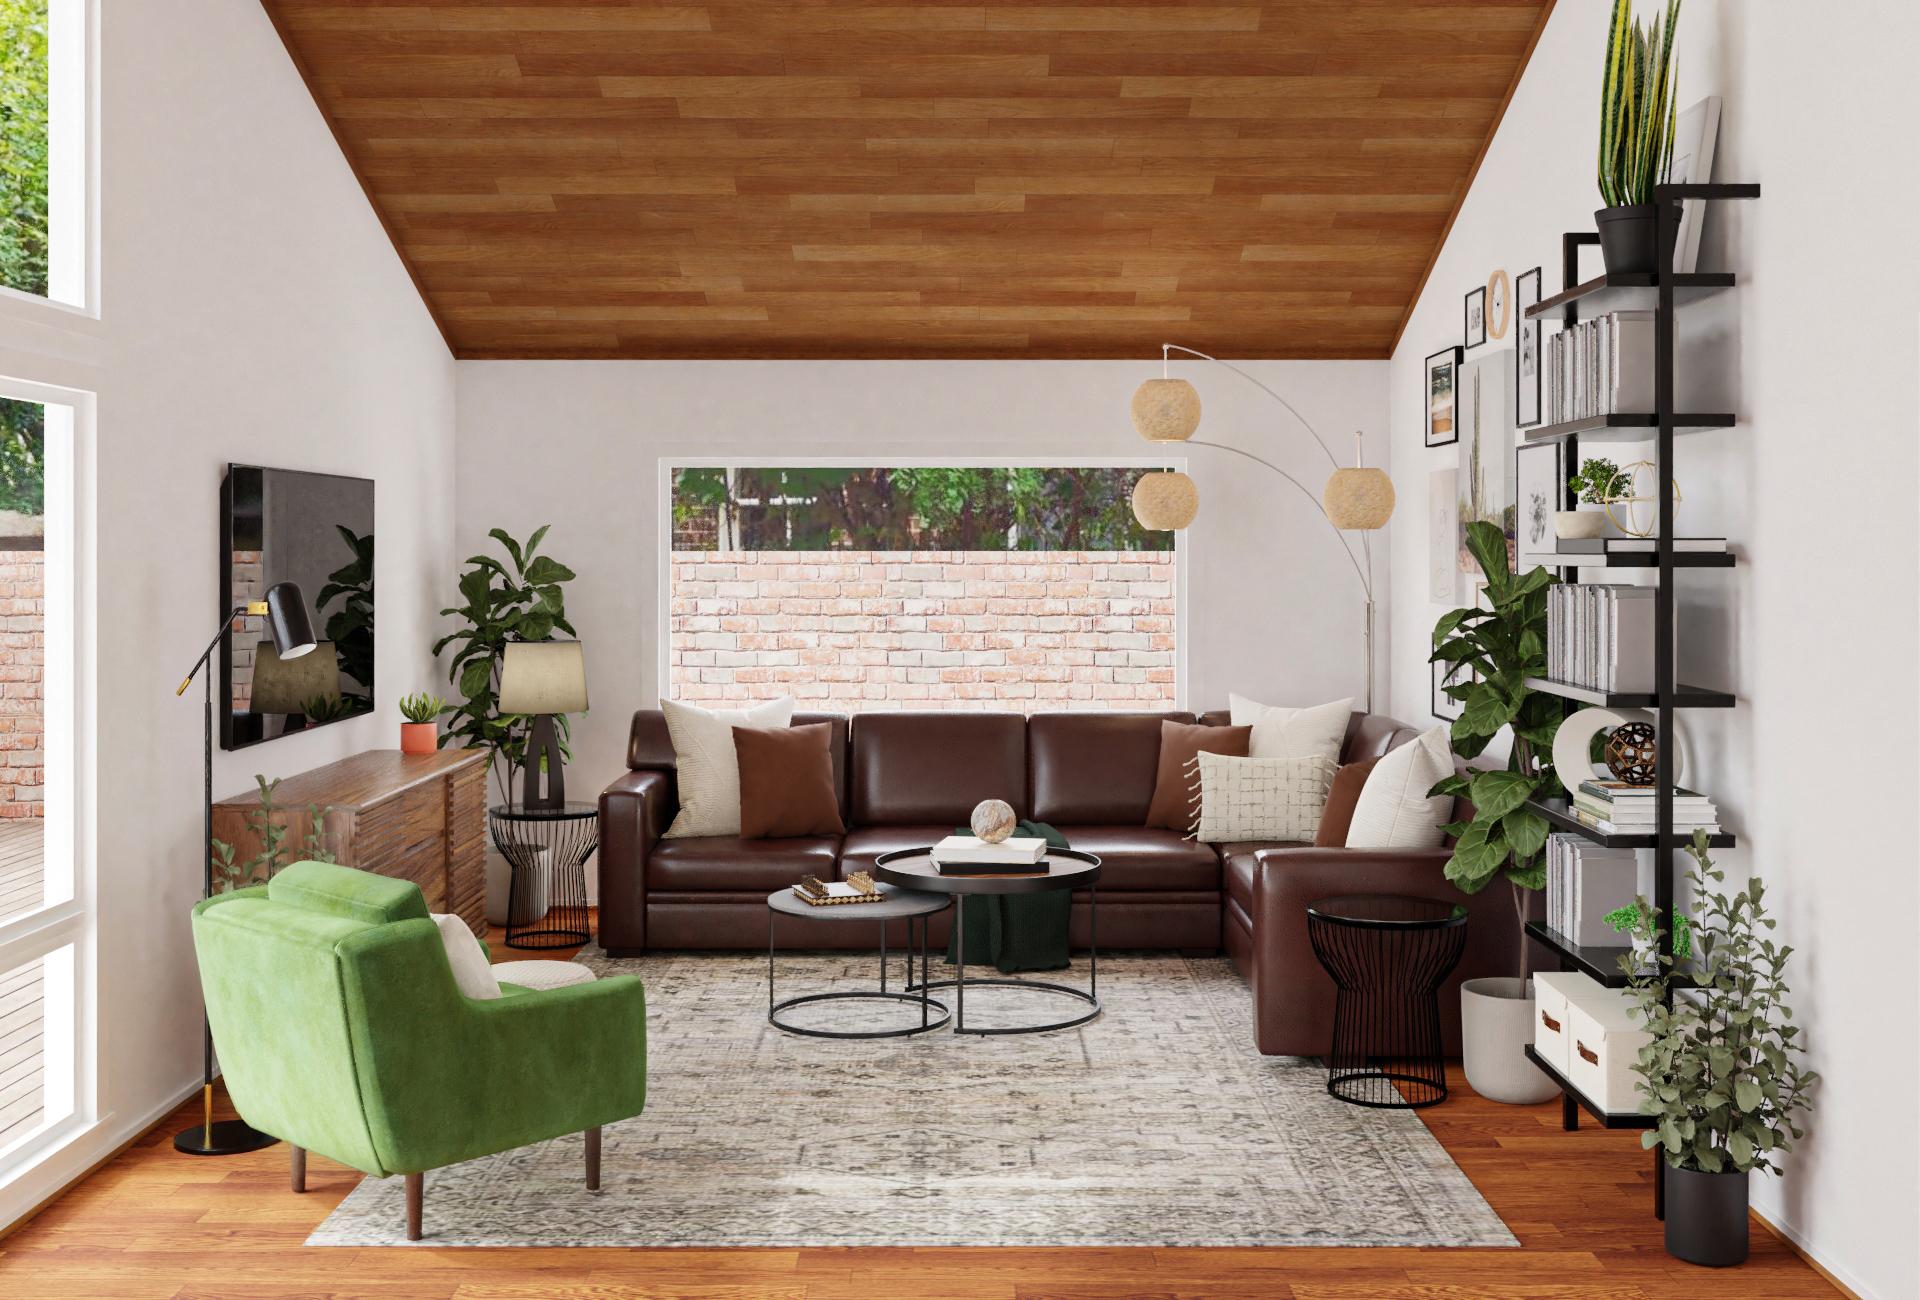 Earthy Tones & Industrial Accents Govern This Living Room